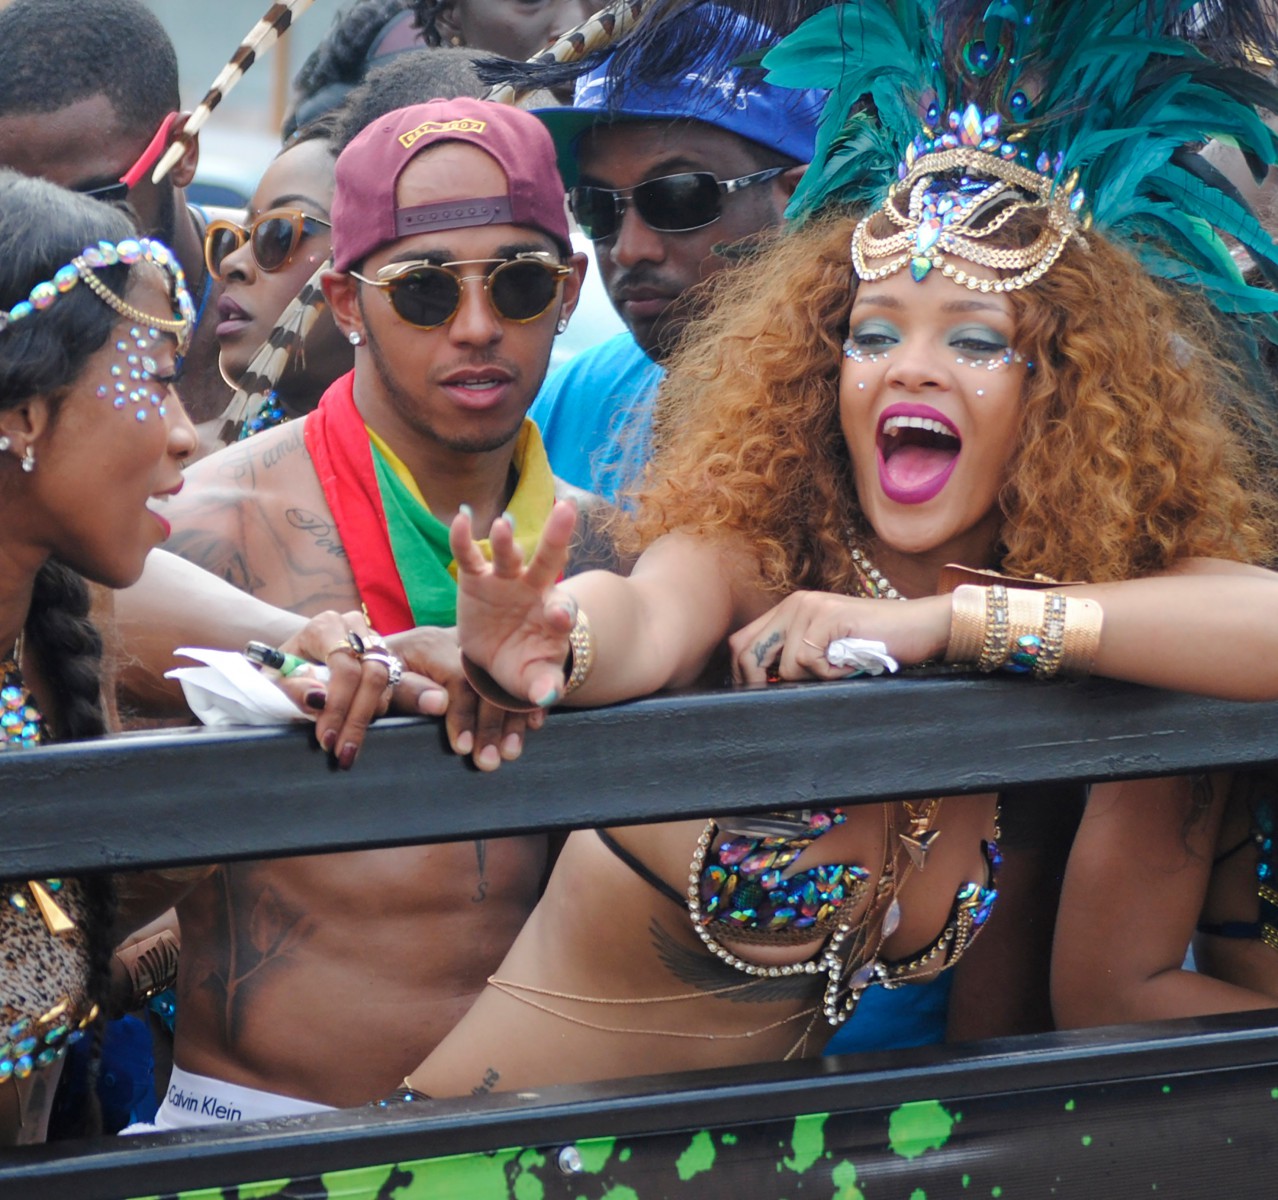 The pair even went to Barbados together to enjoy a carnival